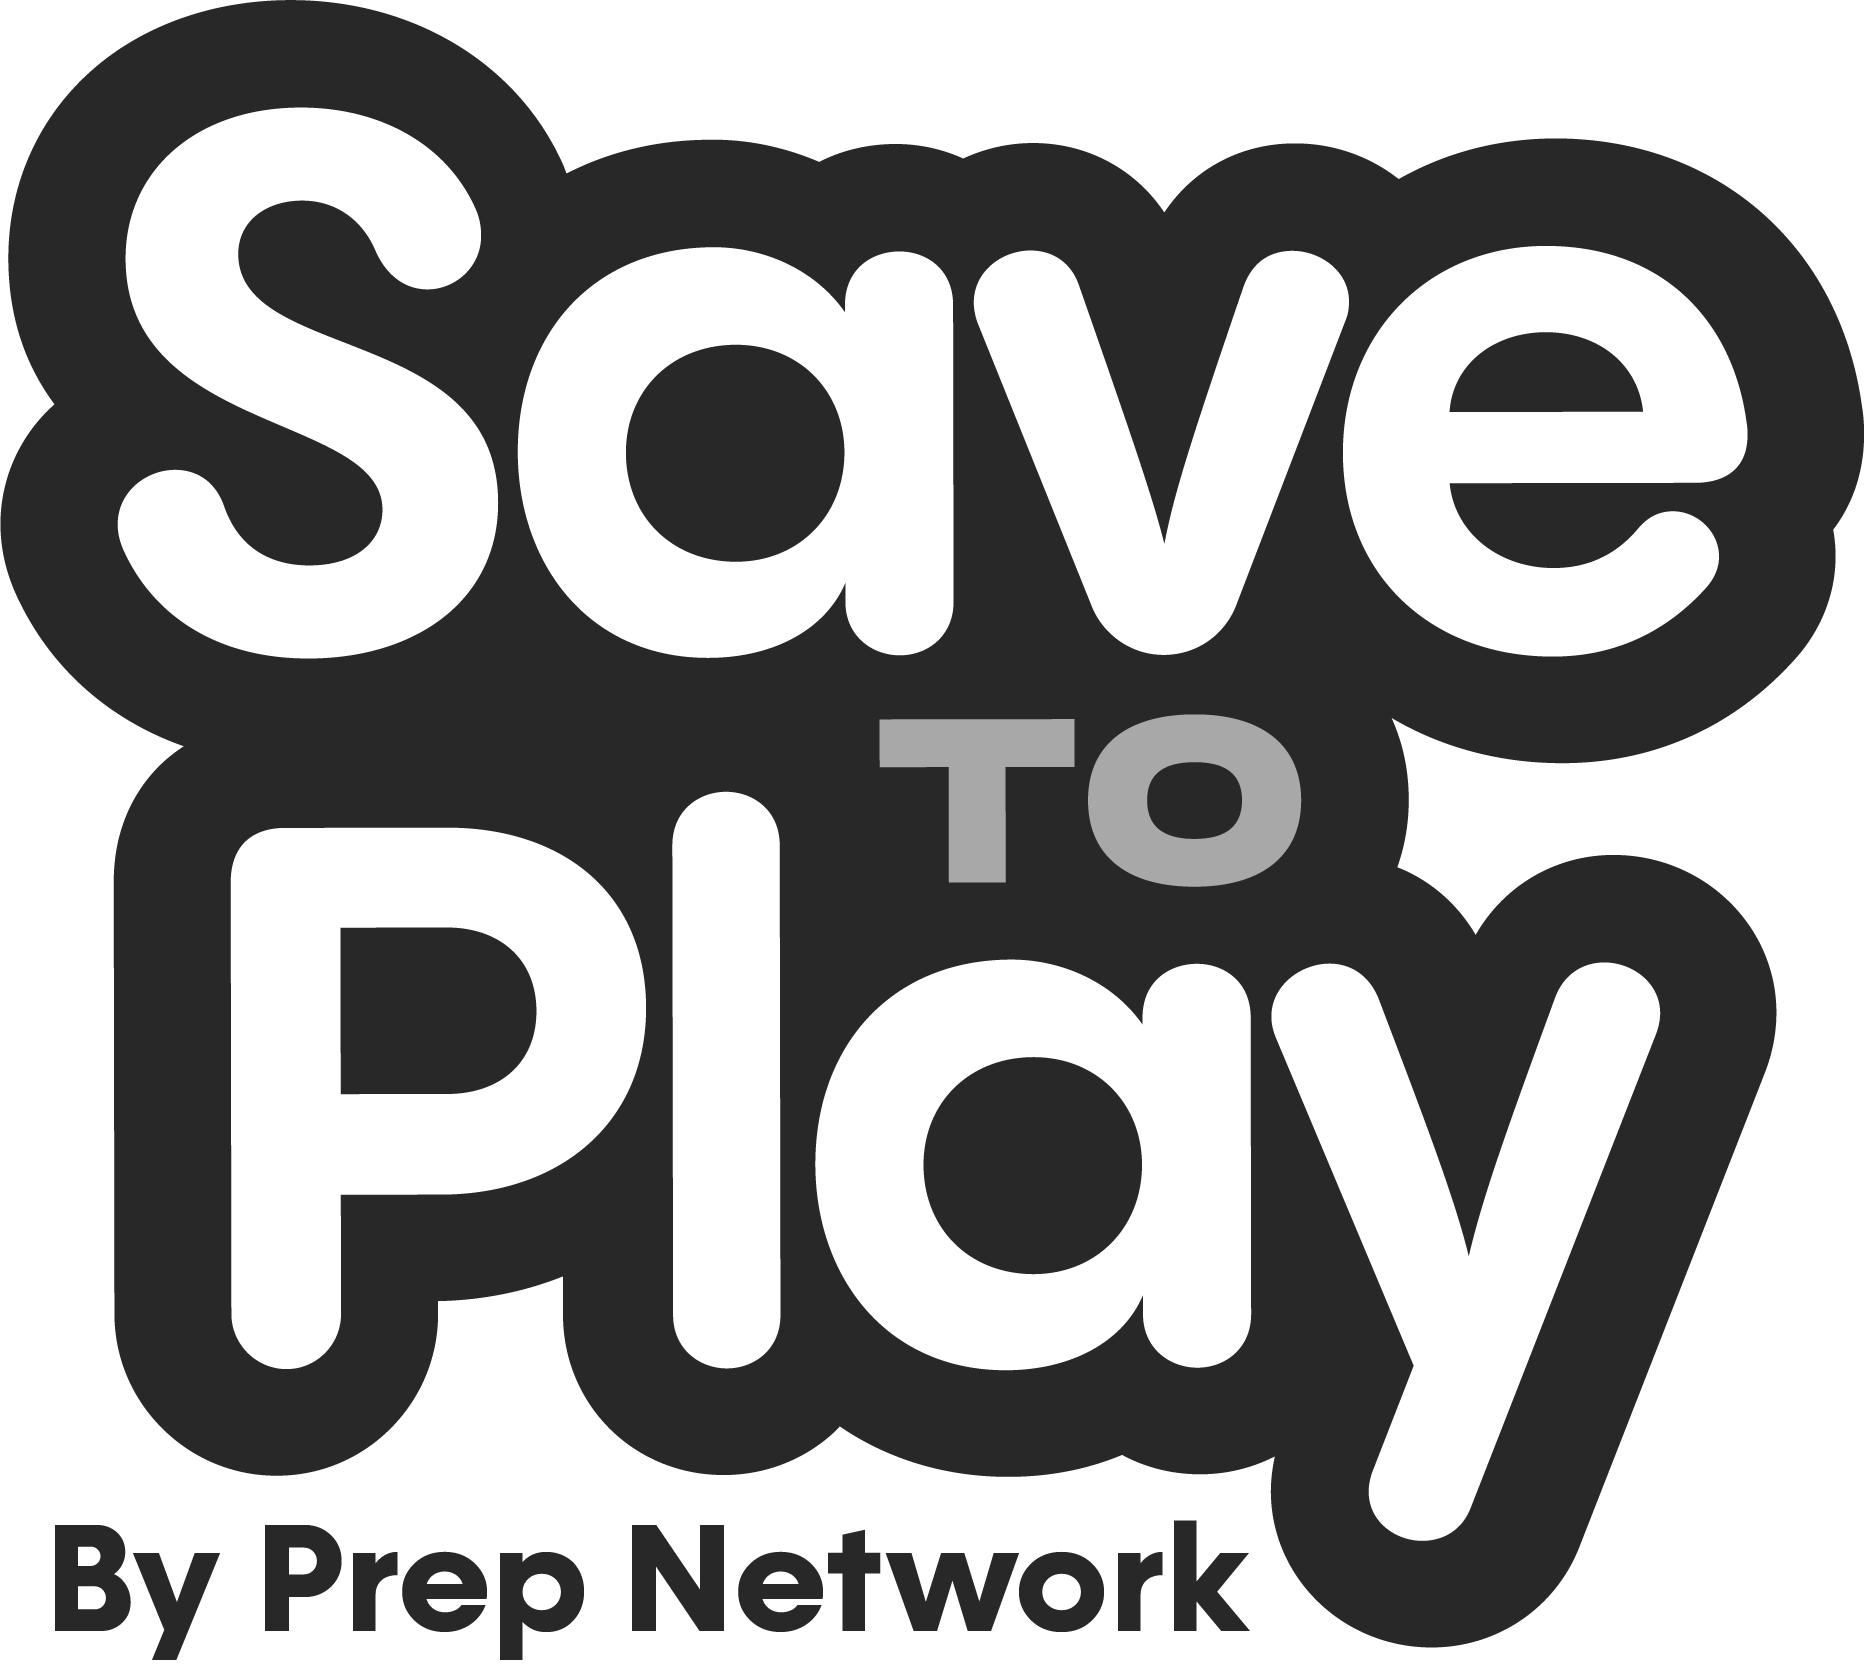 Save to Play